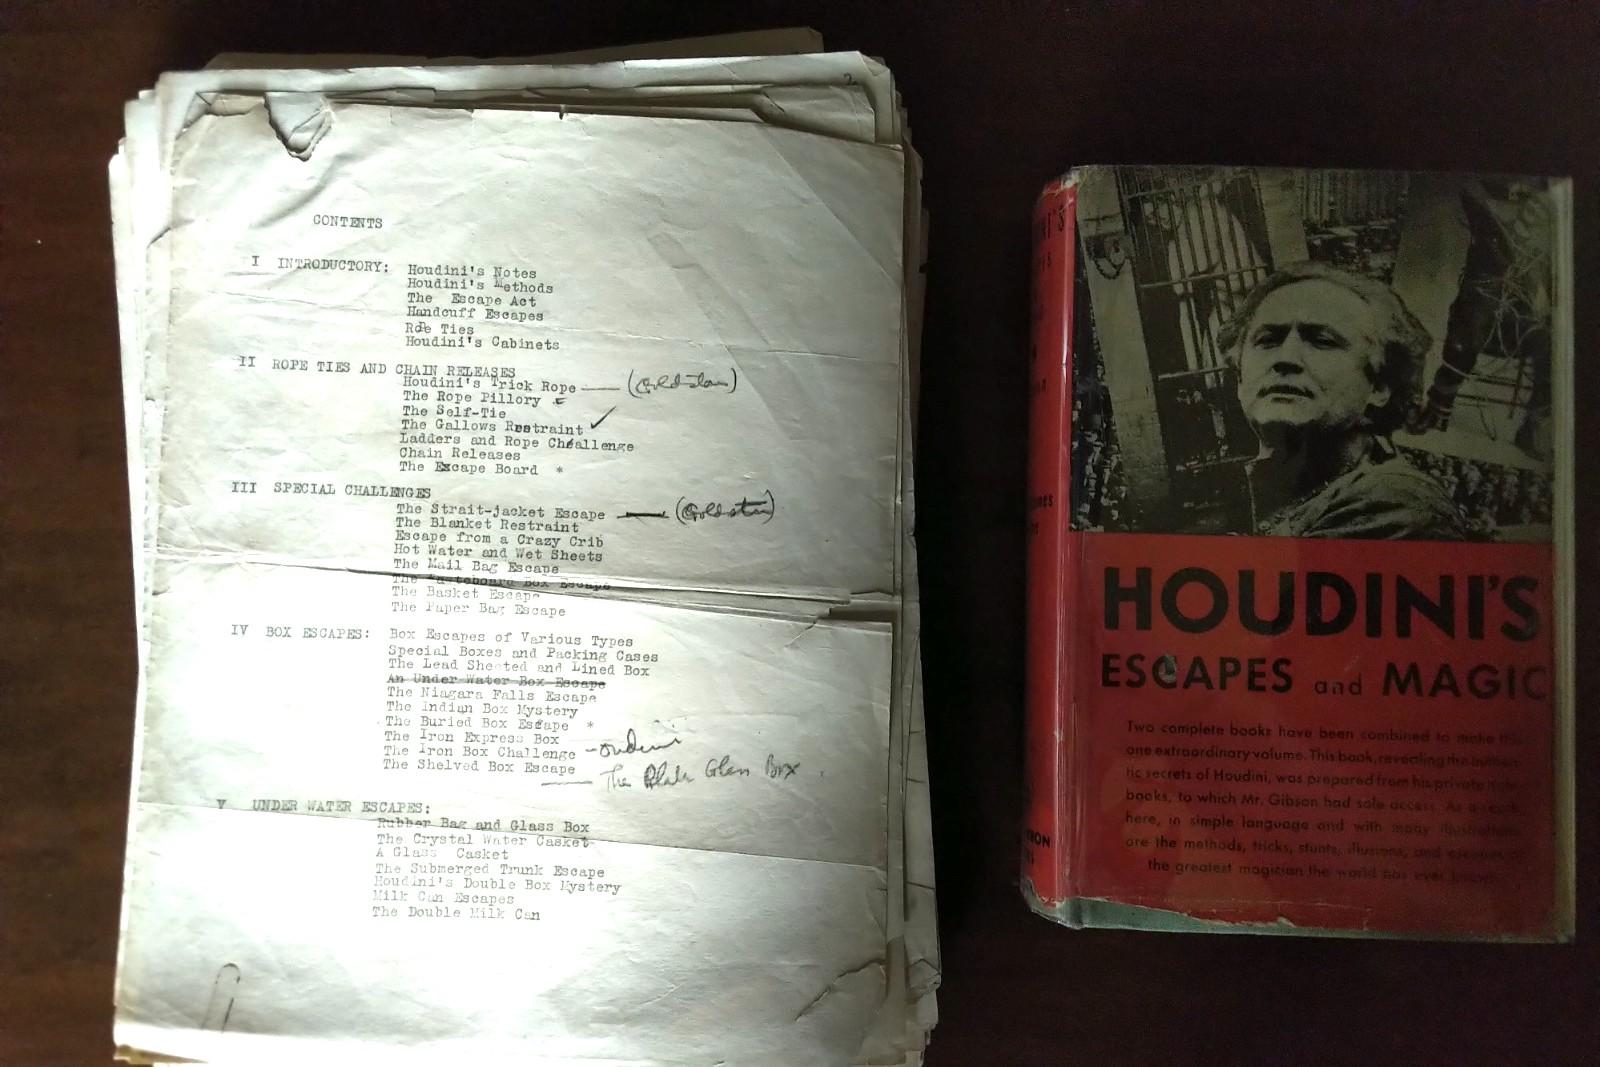 Original manuscript of Houdini's Escapes and Magic by Walter Gibson